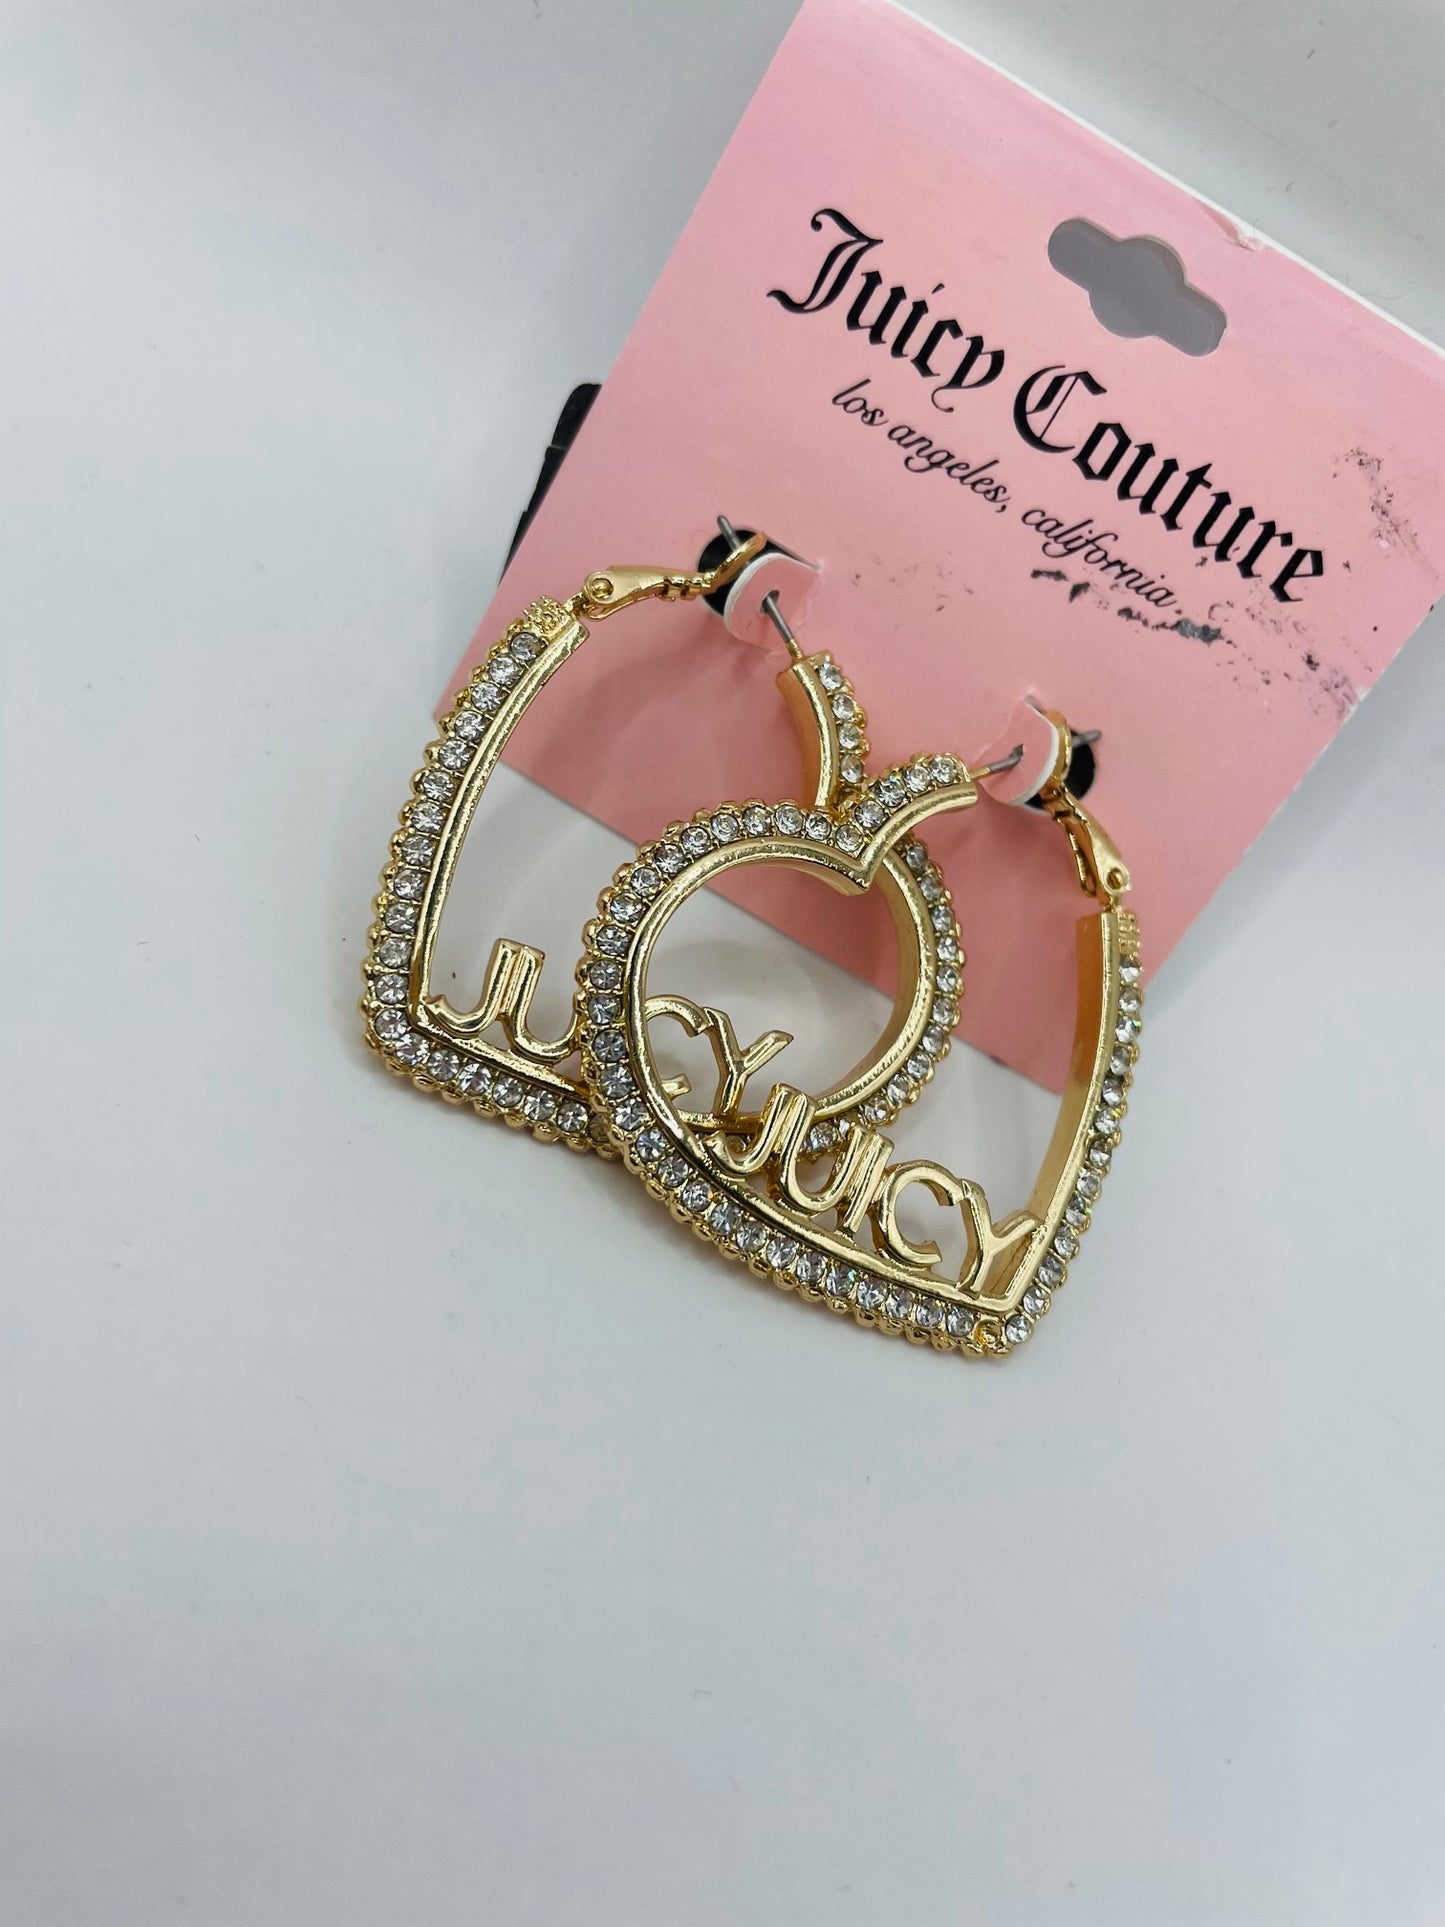 Juicy couture earring